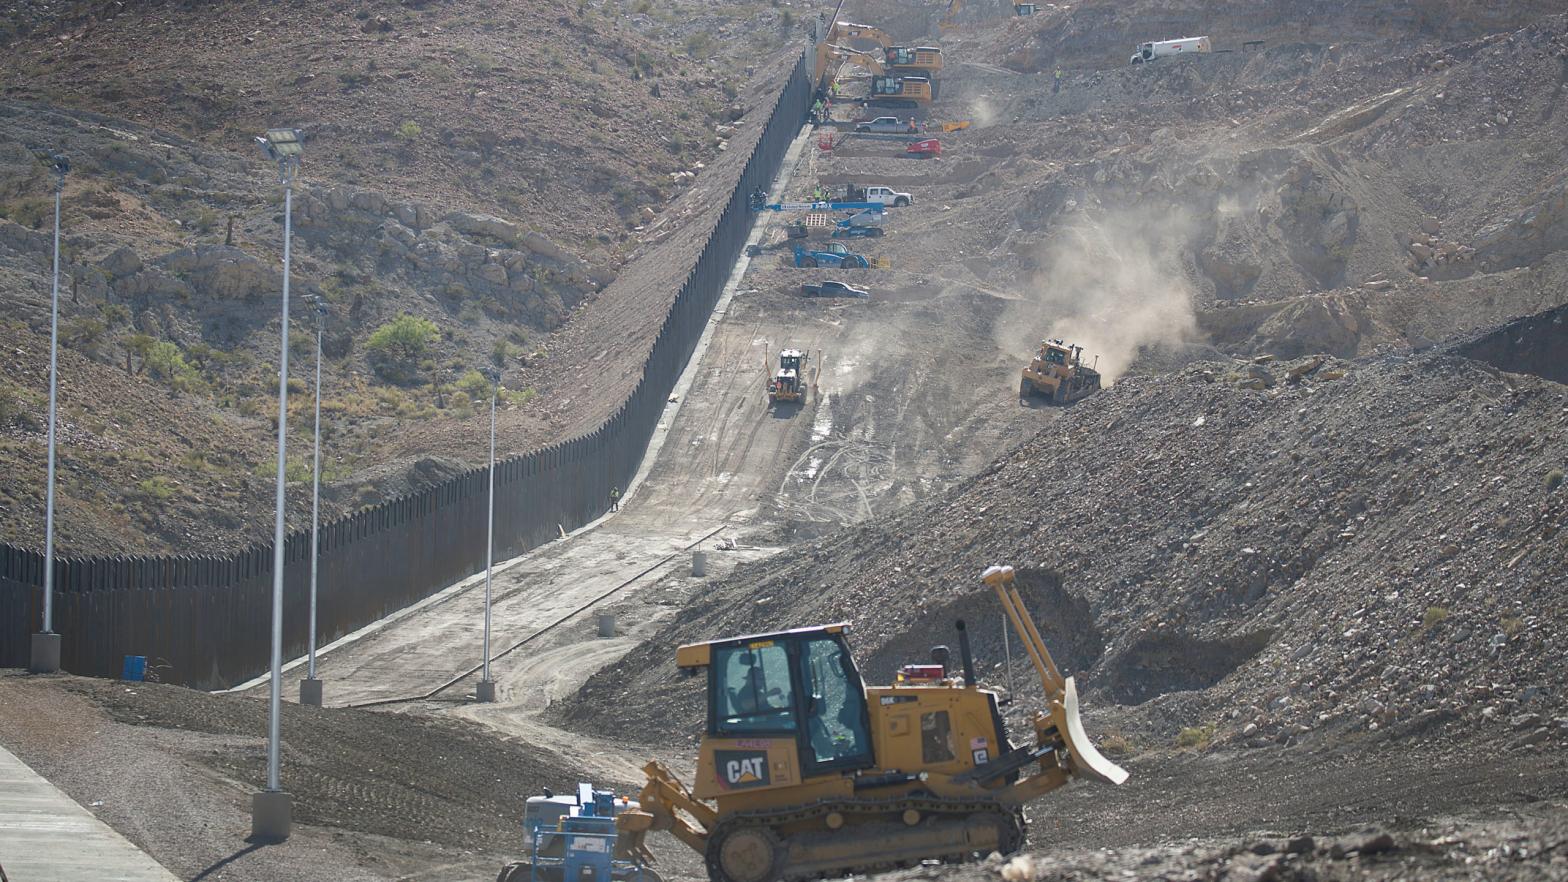 A section of U.S.-Mexico border wall being constructed by We Build the Wall in Sunland Park, June 2019. (Photo: Joe Raedle, Getty Images)